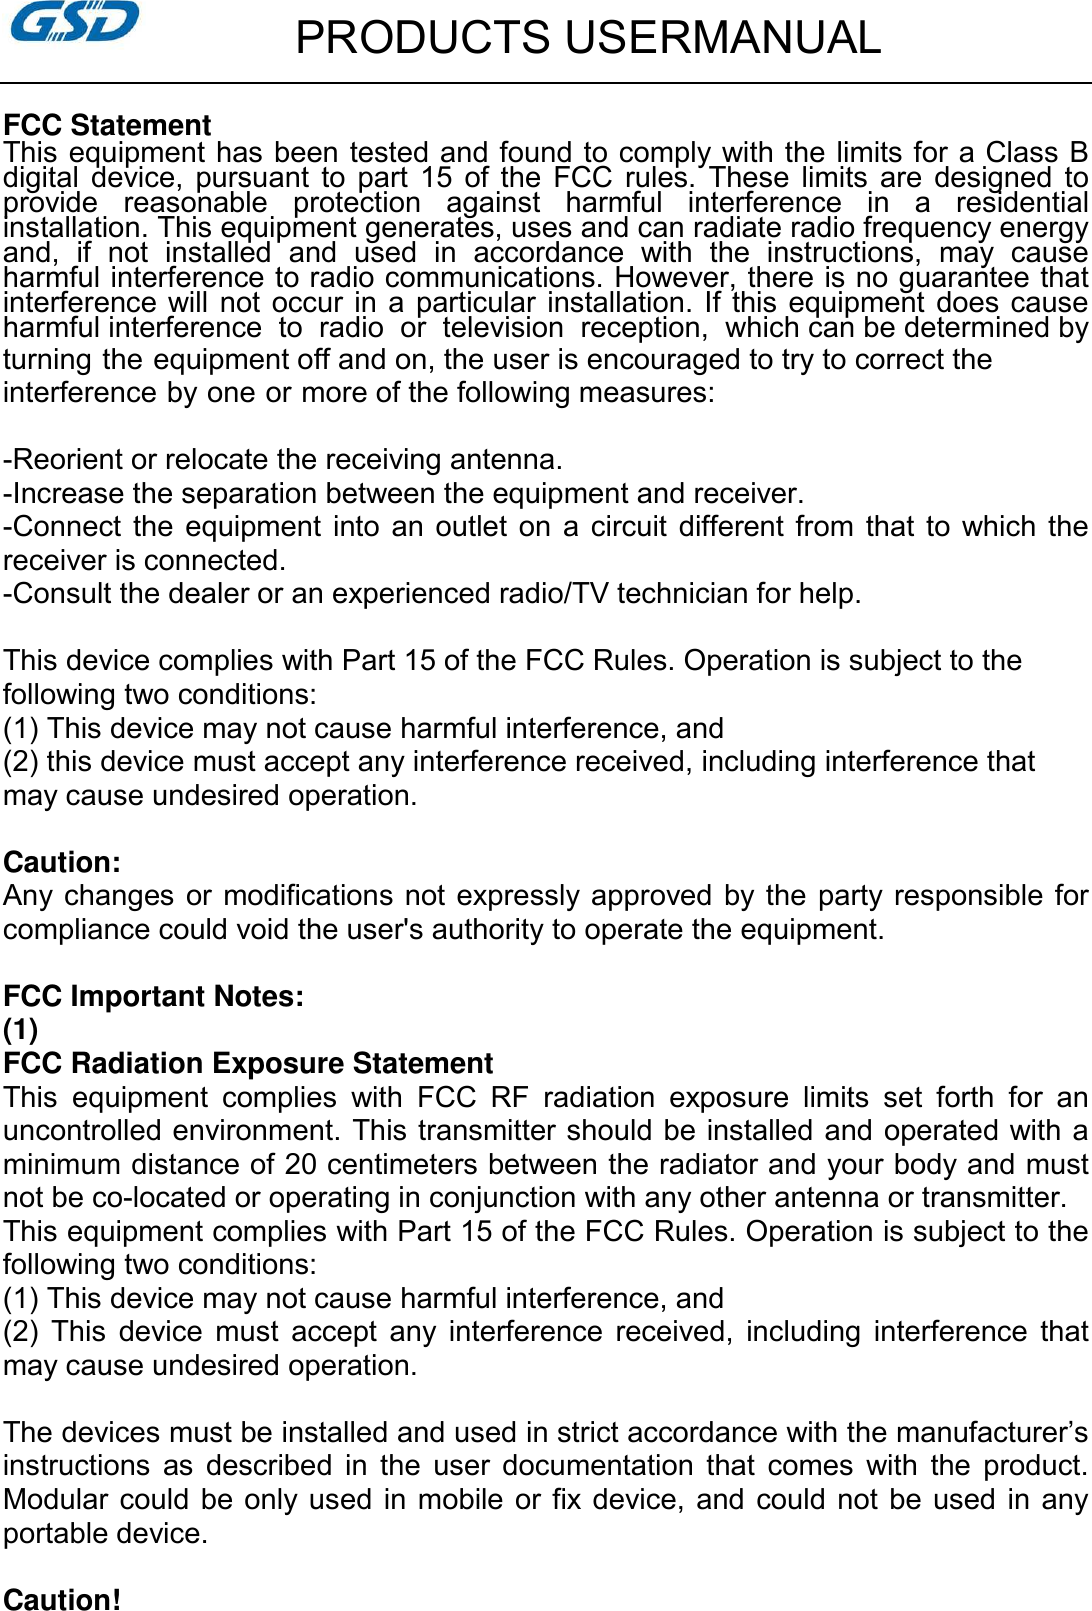         PRODUCTS USERMANUAL  FCC Statement This equipment has been tested and found to comply with the limits for a Class B digital  device,  pursuant  to  part  15  of  the  FCC  rules.  These  limits  are  designed  to provide  reasonable  protection  against  harmful  interference  in  a  residential installation. This equipment generates, uses and can radiate radio frequency energy and,  if  not  installed  and  used  in  accordance  with  the  instructions,  may  cause harmful interference to radio communications. However, there is no guarantee that interference will not  occur in a particular installation. If  this equipment does cause harmful interference  to  radio  or  television  reception,  which can be determined by turning the equipment off and on, the user is encouraged to try to correct the interference by one or more of the following measures:  -Reorient or relocate the receiving antenna. -Increase the separation between the equipment and receiver. -Connect  the  equipment  into  an outlet on  a circuit  different  from  that  to which the receiver is connected. -Consult the dealer or an experienced radio/TV technician for help.  This device complies with Part 15 of the FCC Rules. Operation is subject to the following two conditions: (1) This device may not cause harmful interference, and (2) this device must accept any interference received, including interference that may cause undesired operation.  Caution: Any changes  or modifications not expressly approved by the  party responsible for compliance could void the user&apos;s authority to operate the equipment. FCC Important Notes: (1) FCC Radiation Exposure Statement       This  equipment  complies  with  FCC  RF  radiation  exposure  limits  set  forth  for  an uncontrolled environment. This transmitter should be installed and operated with a minimum distance of 20 centimeters between the radiator and your body and must not be co-located or operating in conjunction with any other antenna or transmitter. This equipment complies with Part 15 of the FCC Rules. Operation is subject to the following two conditions:     (1) This device may not cause harmful interference, and     (2)  This  device  must  accept  any  interference  received,  including  interference  that may cause undesired operation.      The devices must be installed and used in strict accordance with the manufacturer’s instructions  as  described  in  the  user  documentation  that  comes  with  the  product. Modular could  be only used  in mobile or  fix device, and could not  be used in any portable device.  Caution!   